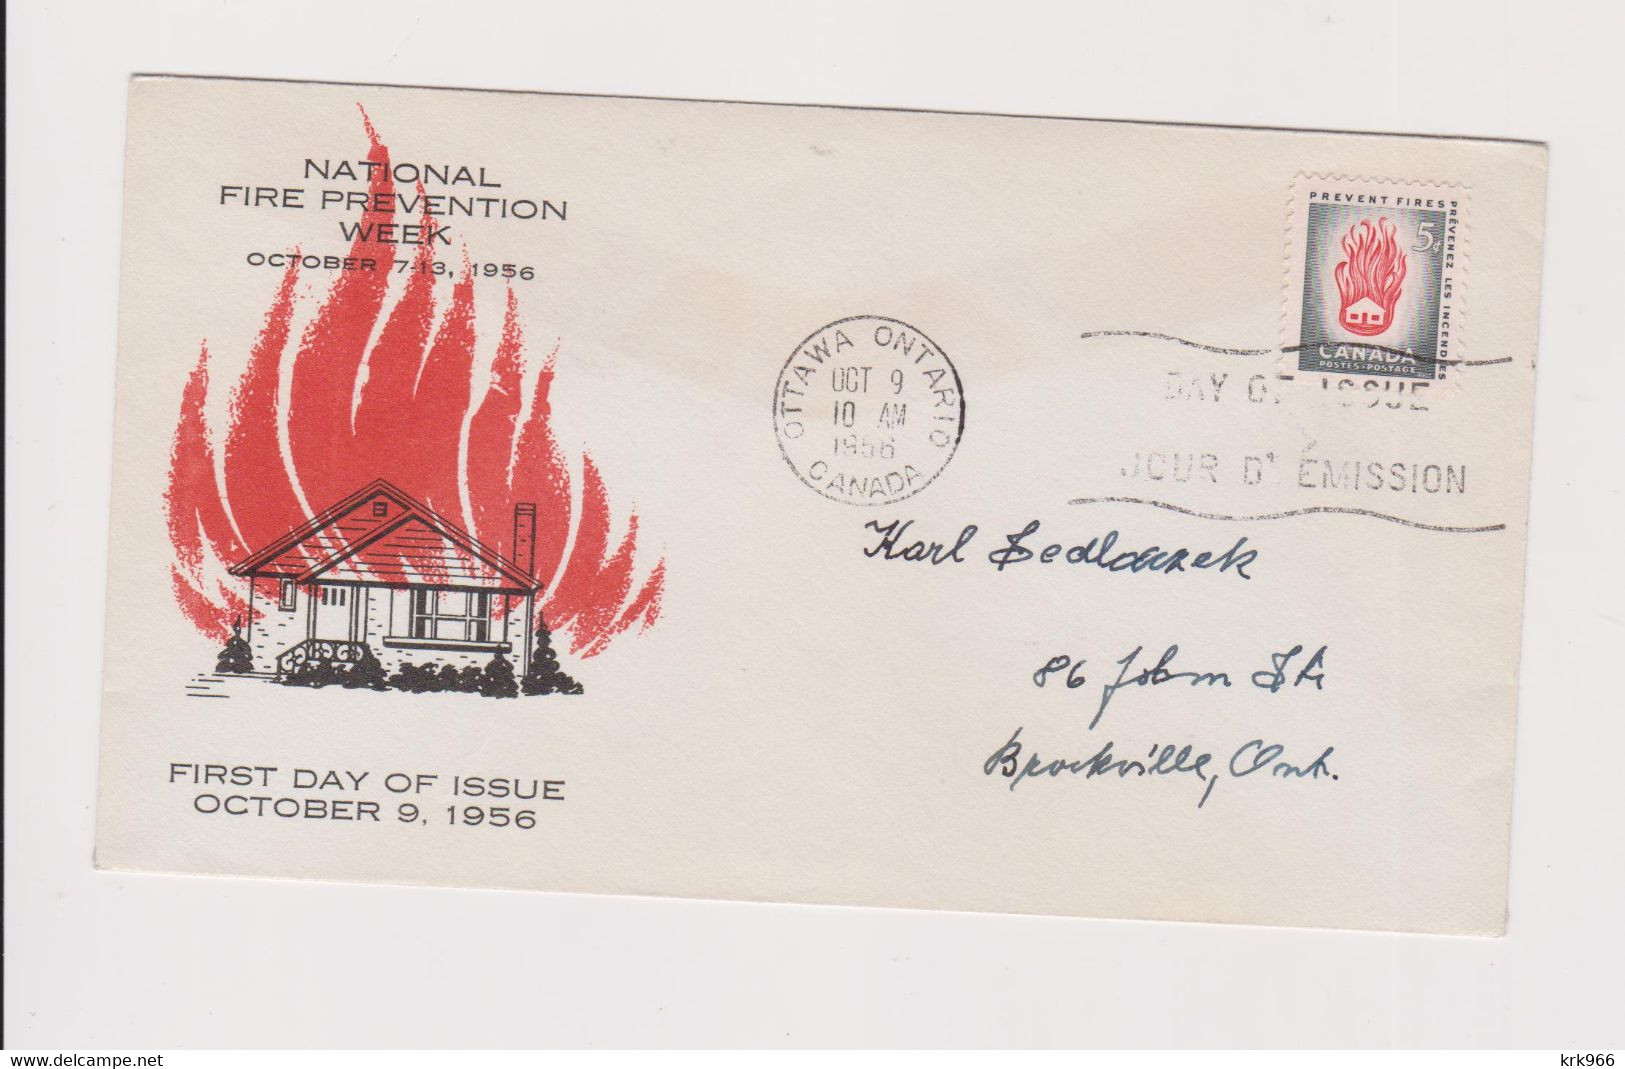 CANADA  1956 FDC Cover - Covers & Documents